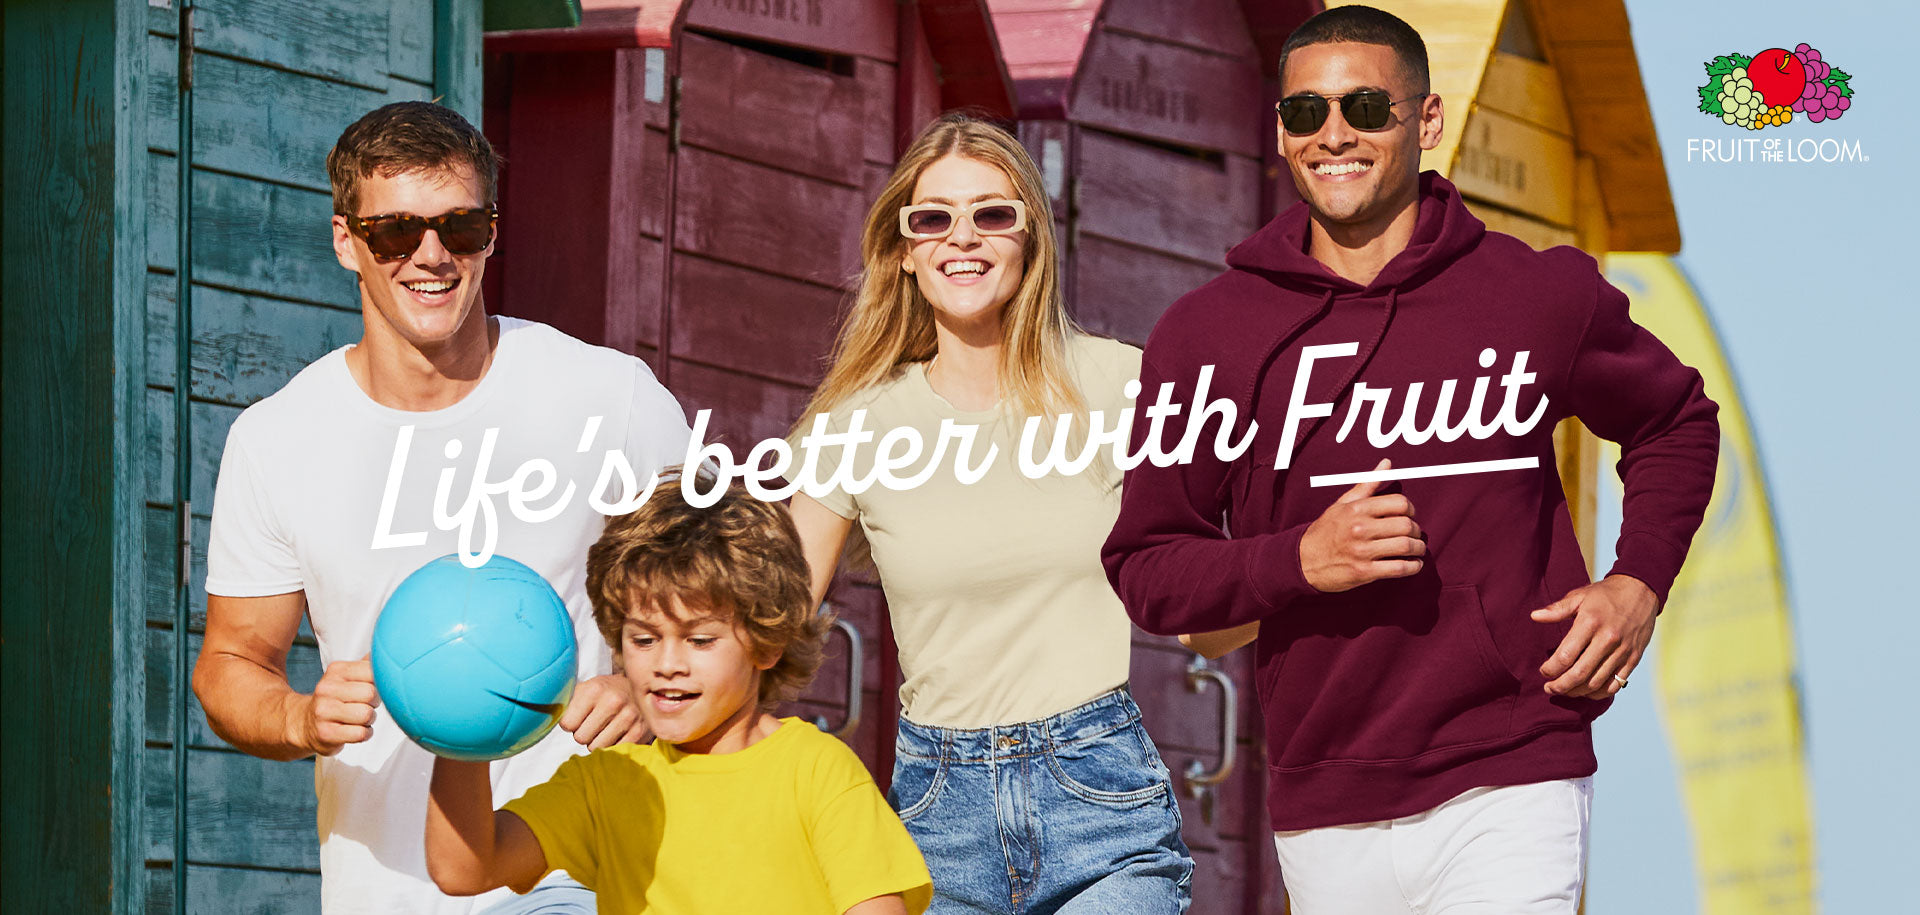 Fruit of the Loom Life's better with Fruit banner